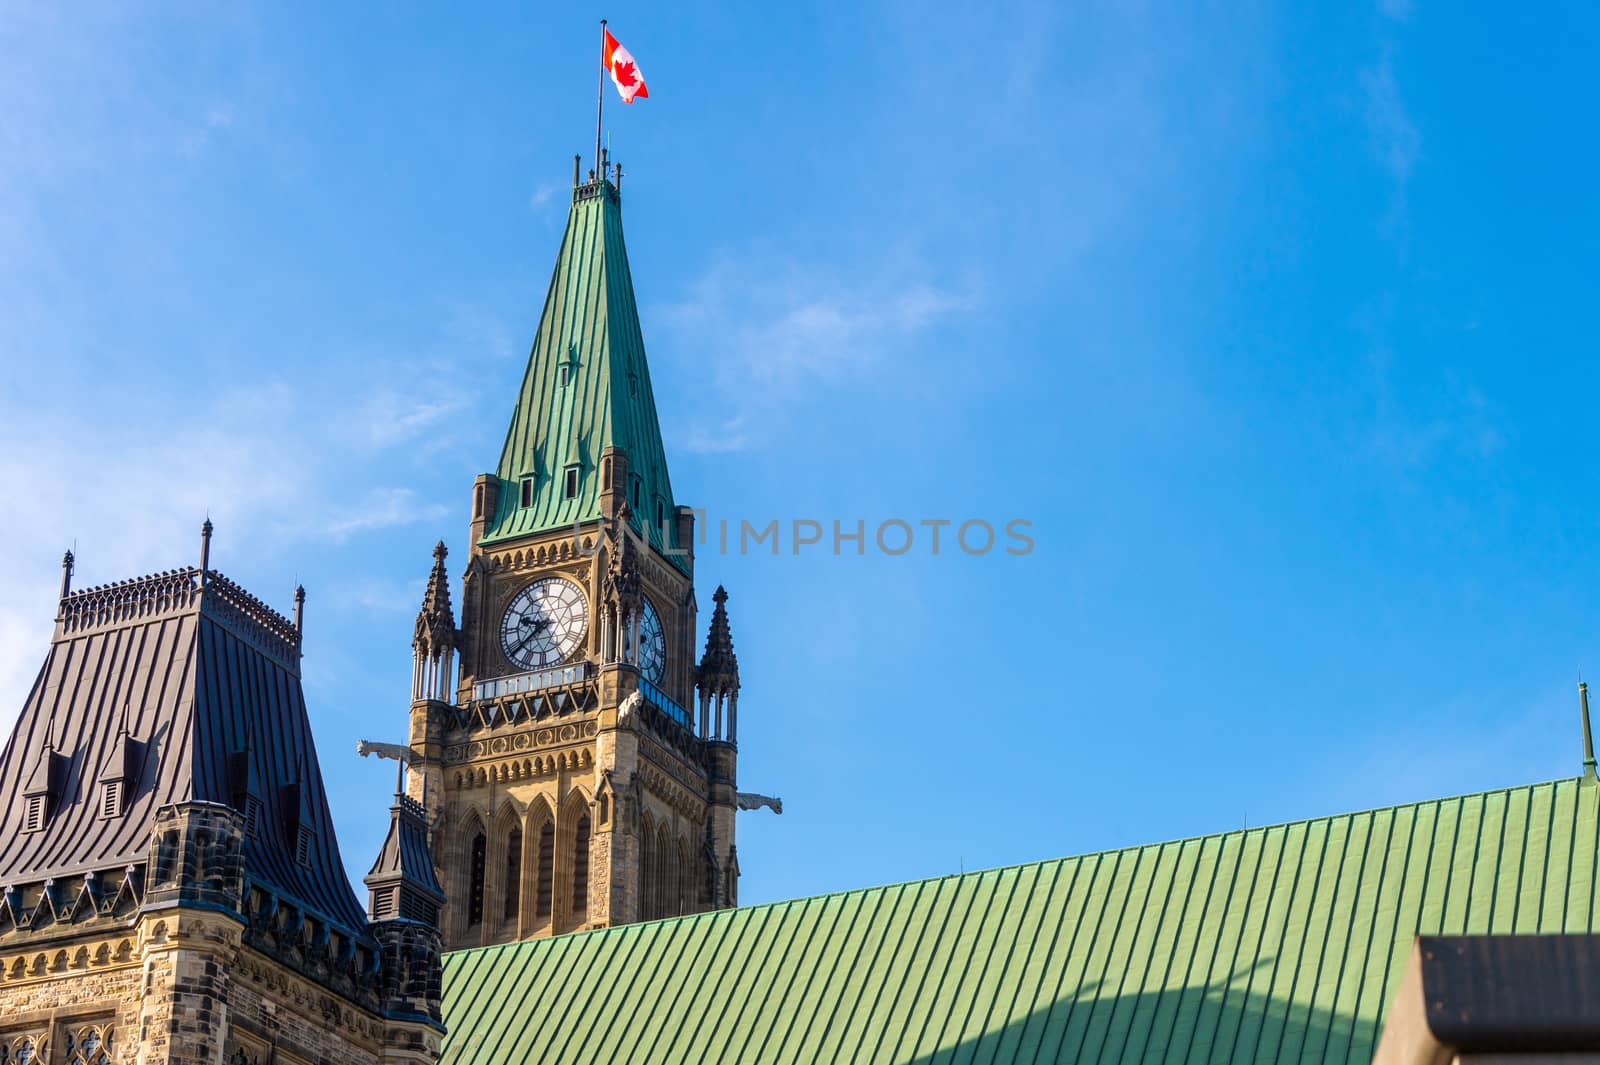 Canadian Parliament Building in Ottawa (2019) by mbruxelle